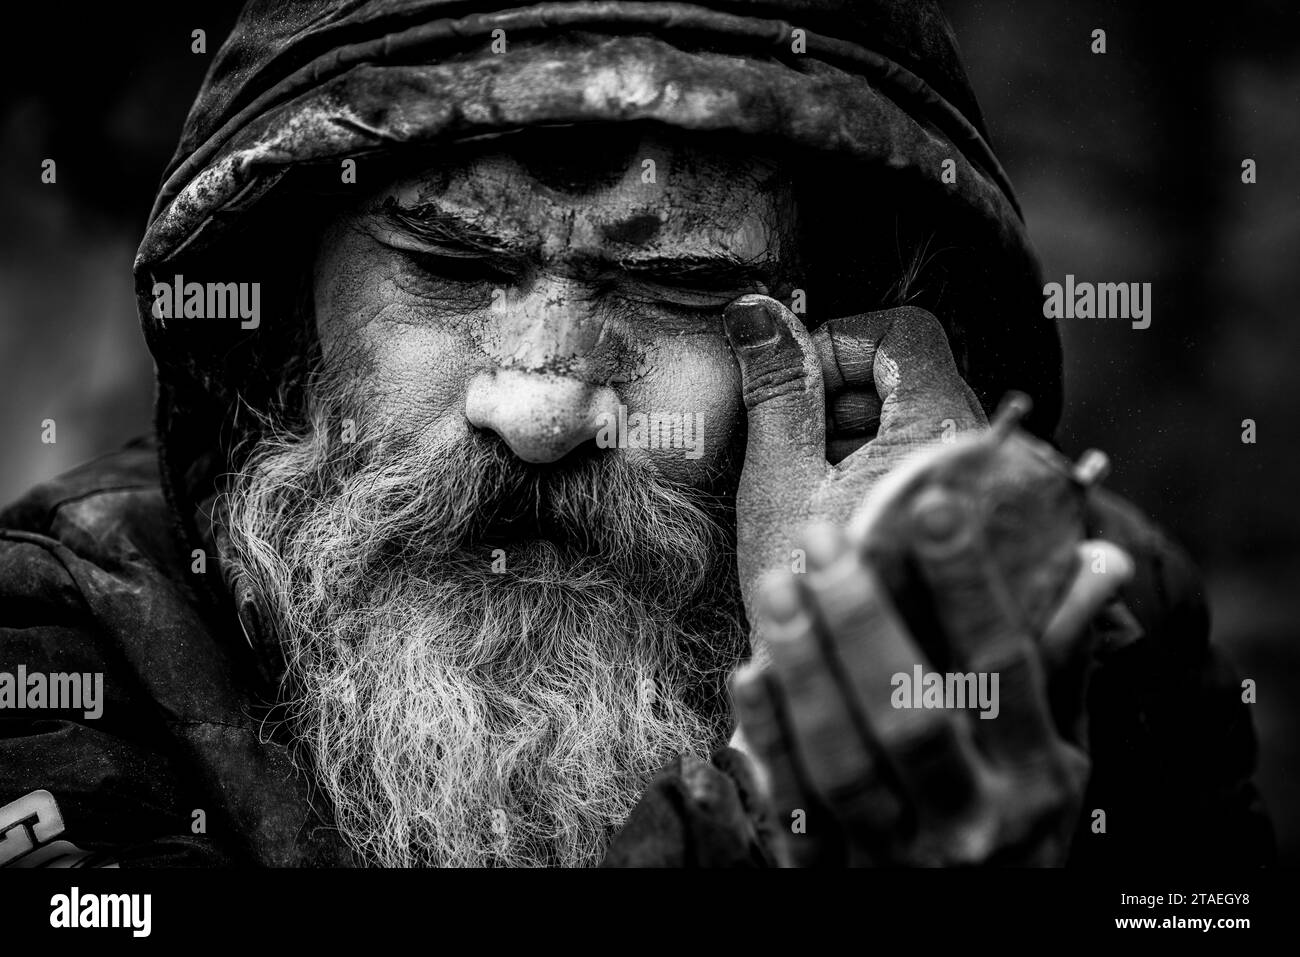 Kathmandu, Nepal- April 20,2019 : Sadhu-Indian Holy man sitting in the temple. In Hinduism, Sadhu is a common term for a mystic, an ascetic. Stock Photo